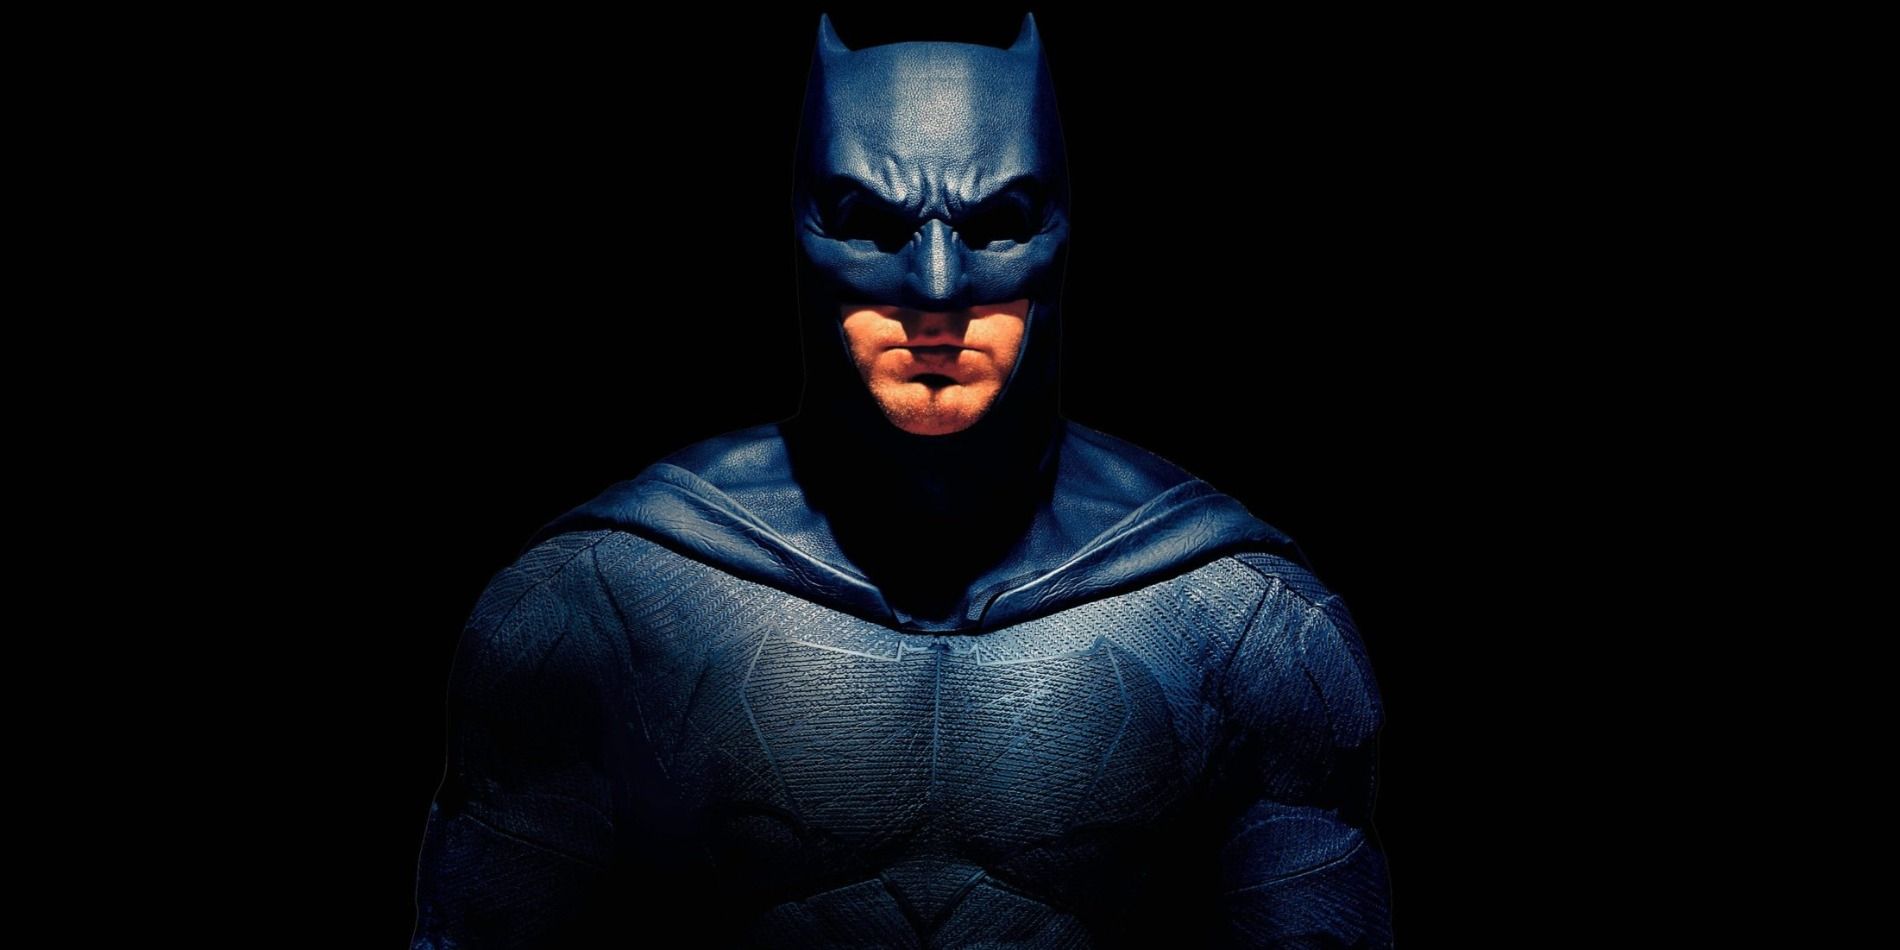 Promo of Ben Affleck's Batman with a shadowy background